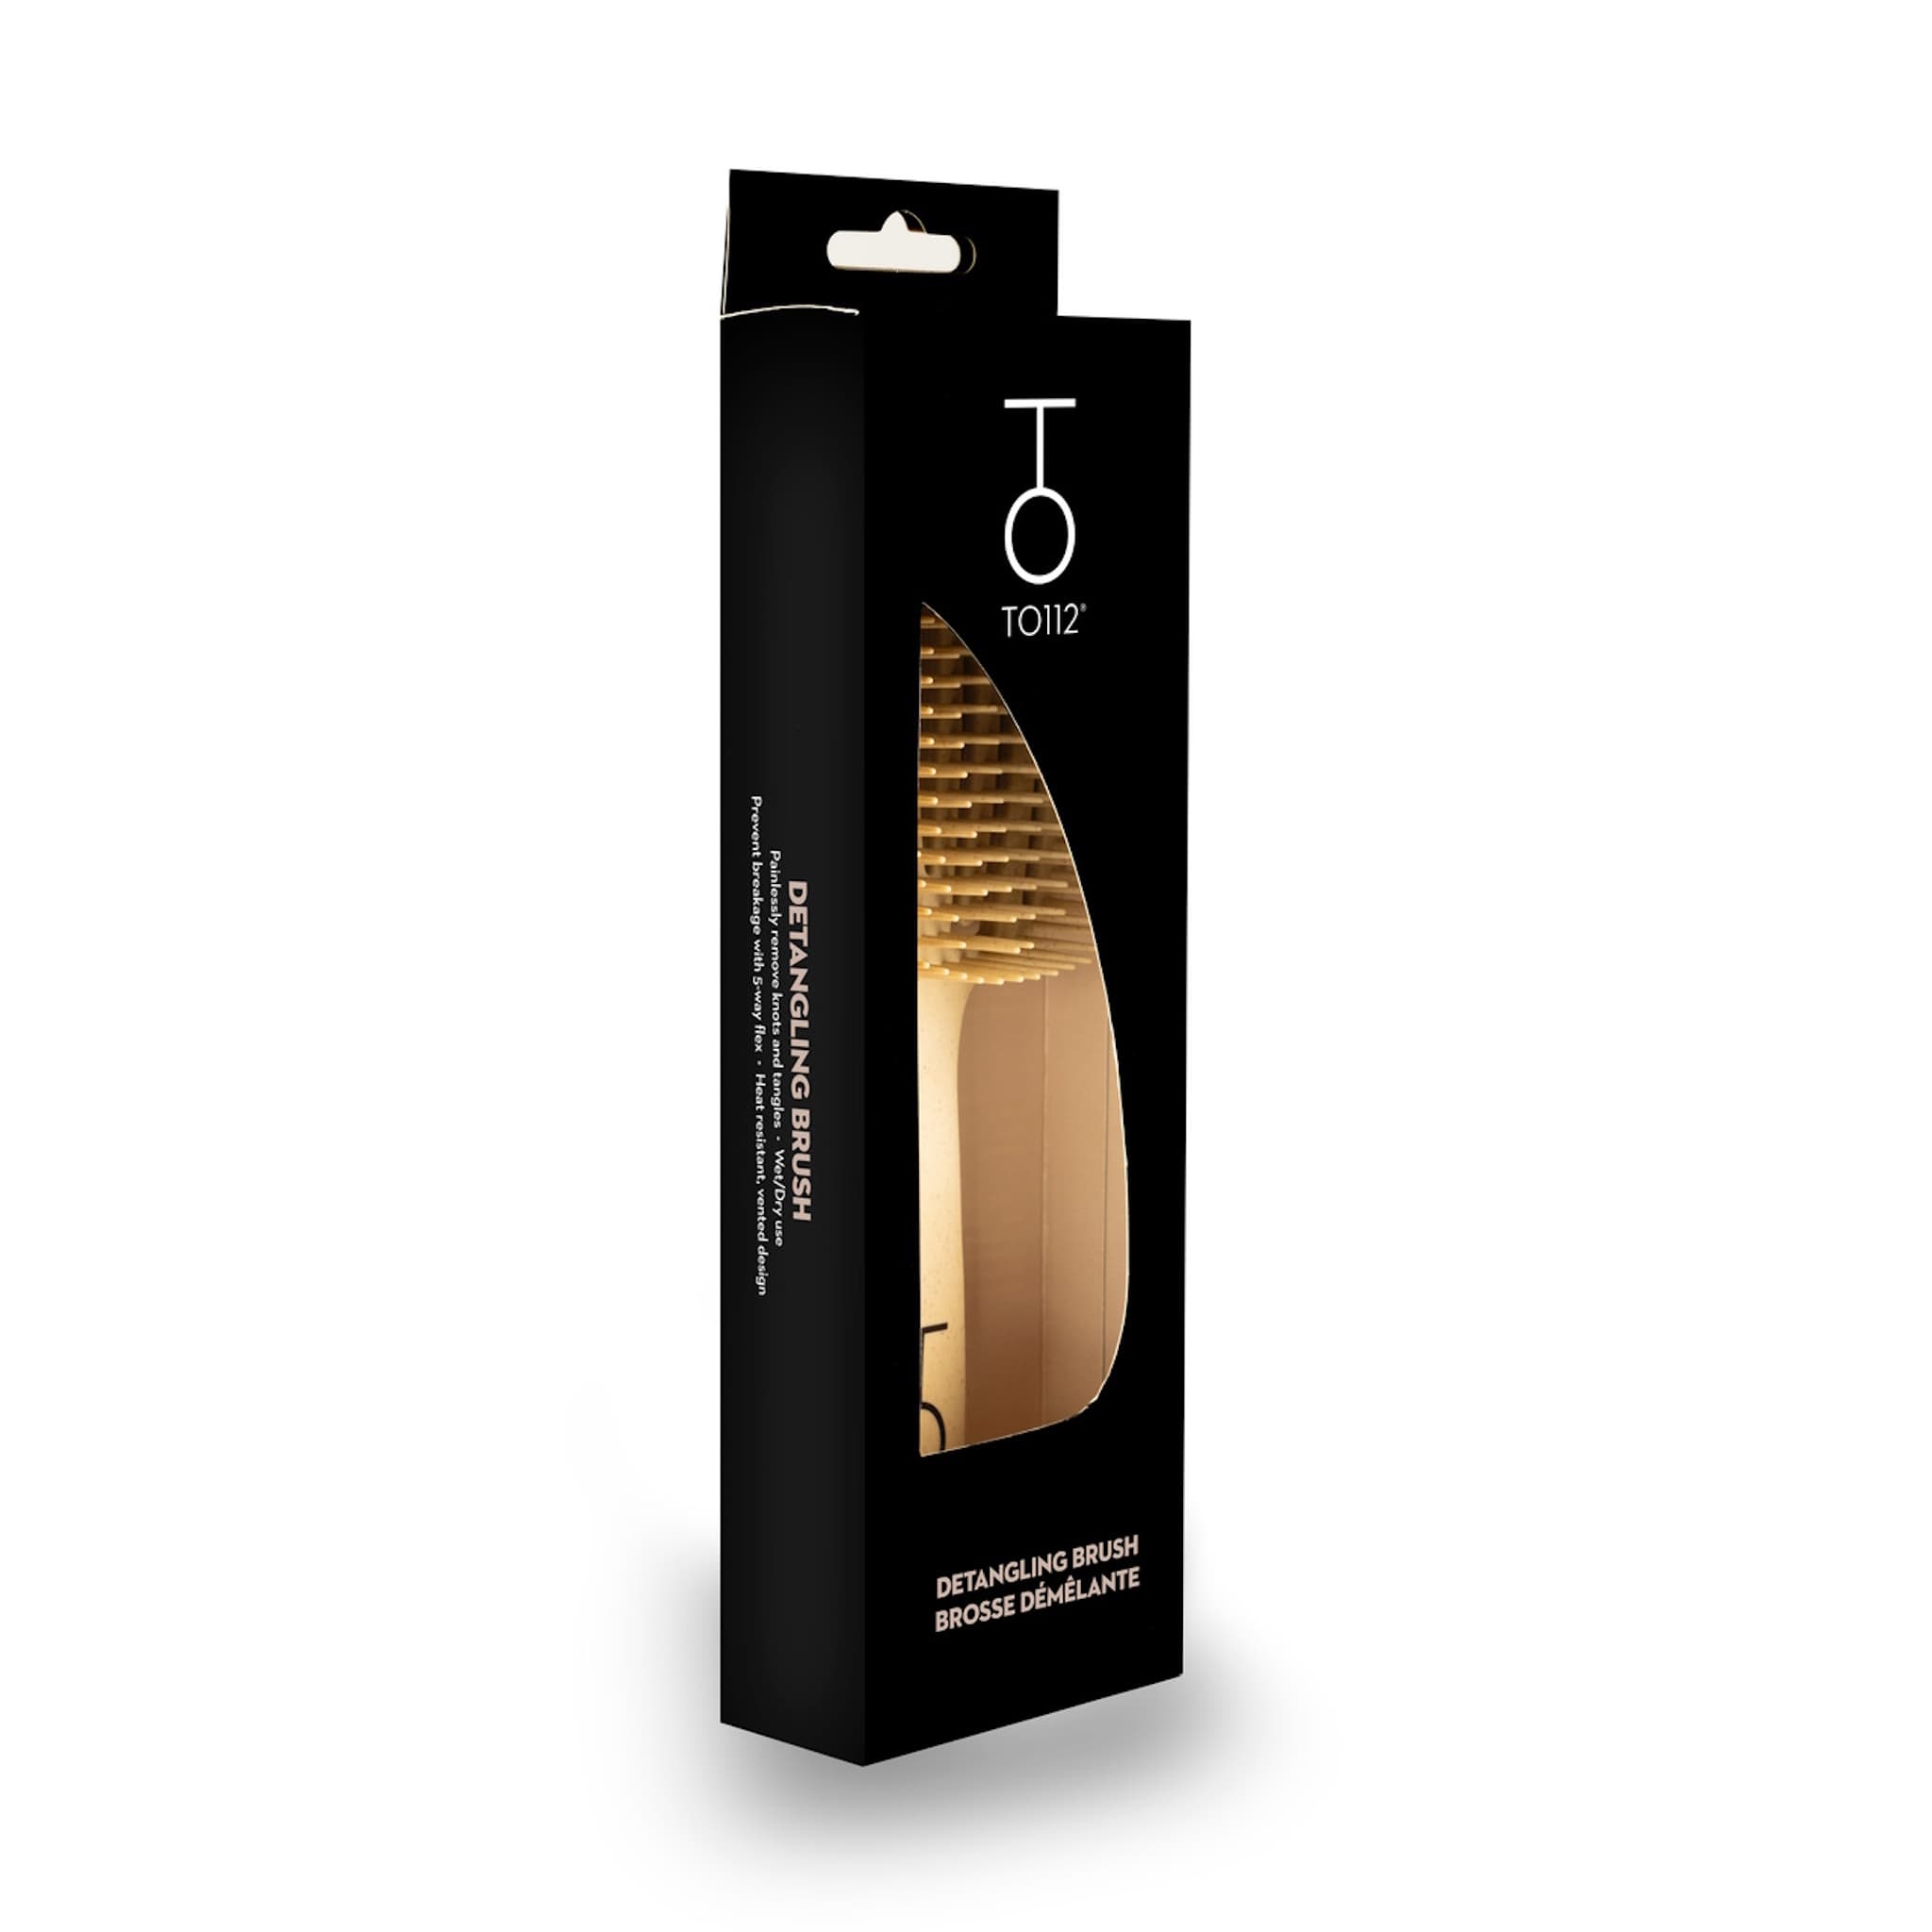 TO112 Detangling Brush made with biodegradable wheat straw plastic in a recycled paper box